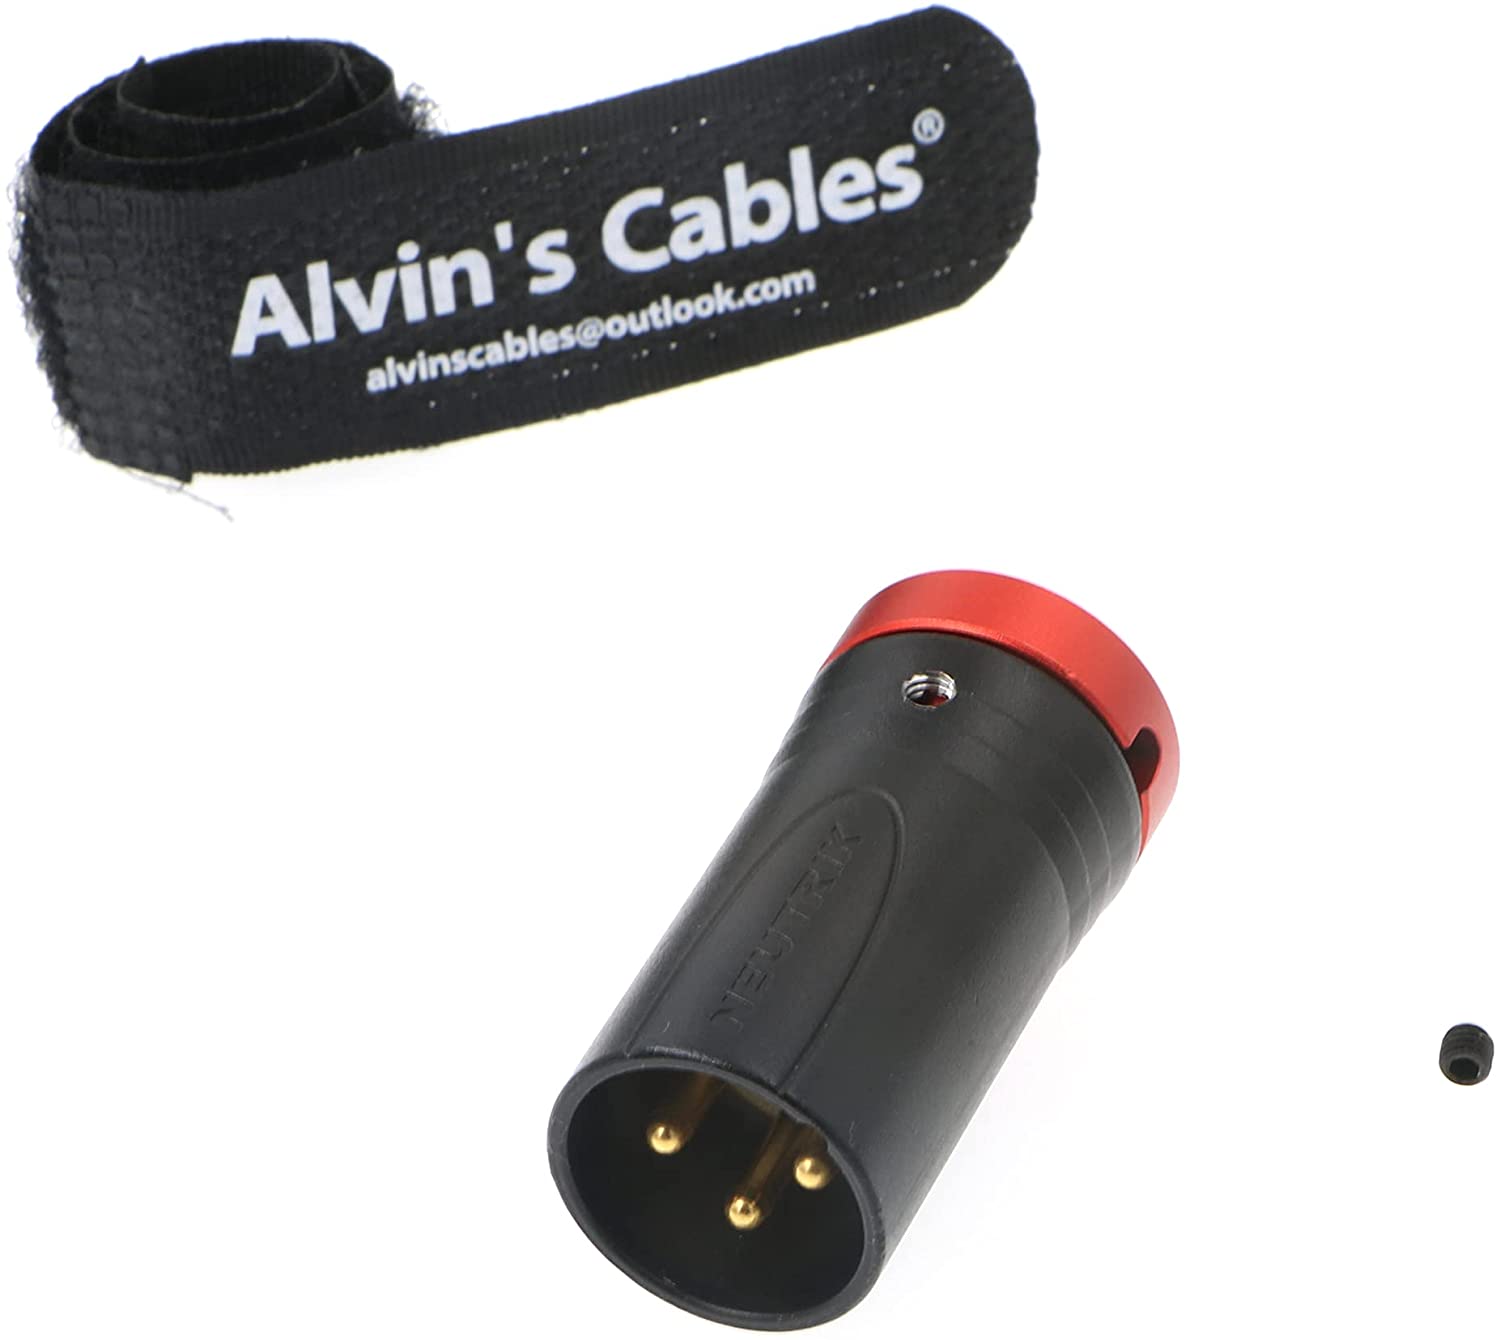 Low-Profile XLR 3 Pin Male Connector Original Plug for Audio Devices Alvin’s Cables Blue/Red/Green/Black